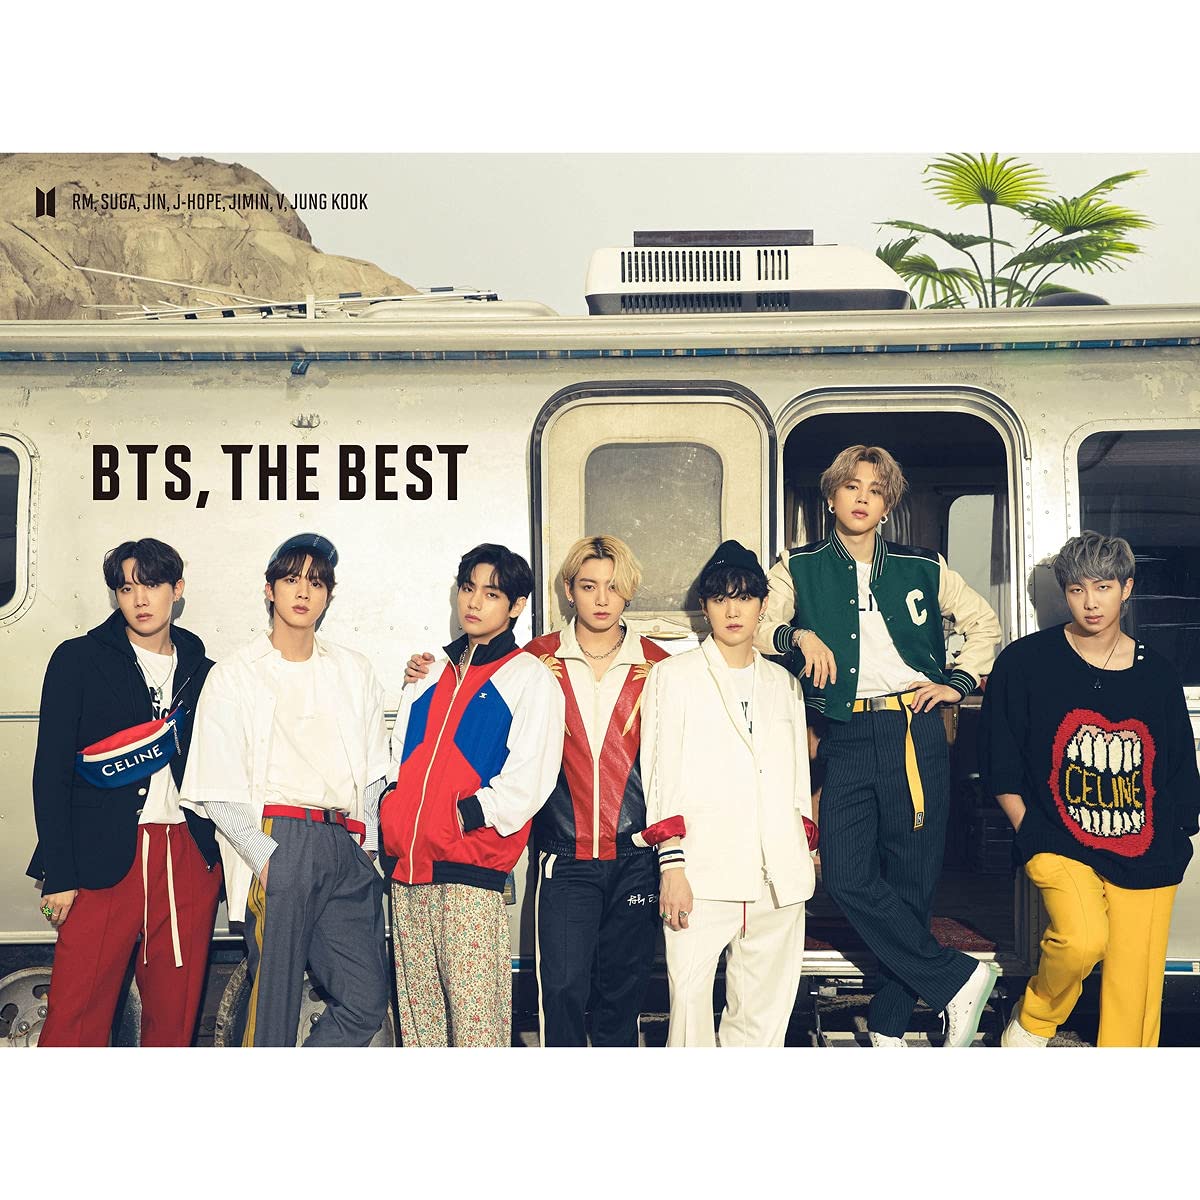 BTS, THE BEST [Limited Edition B] [2 CD/ 2 DVD]